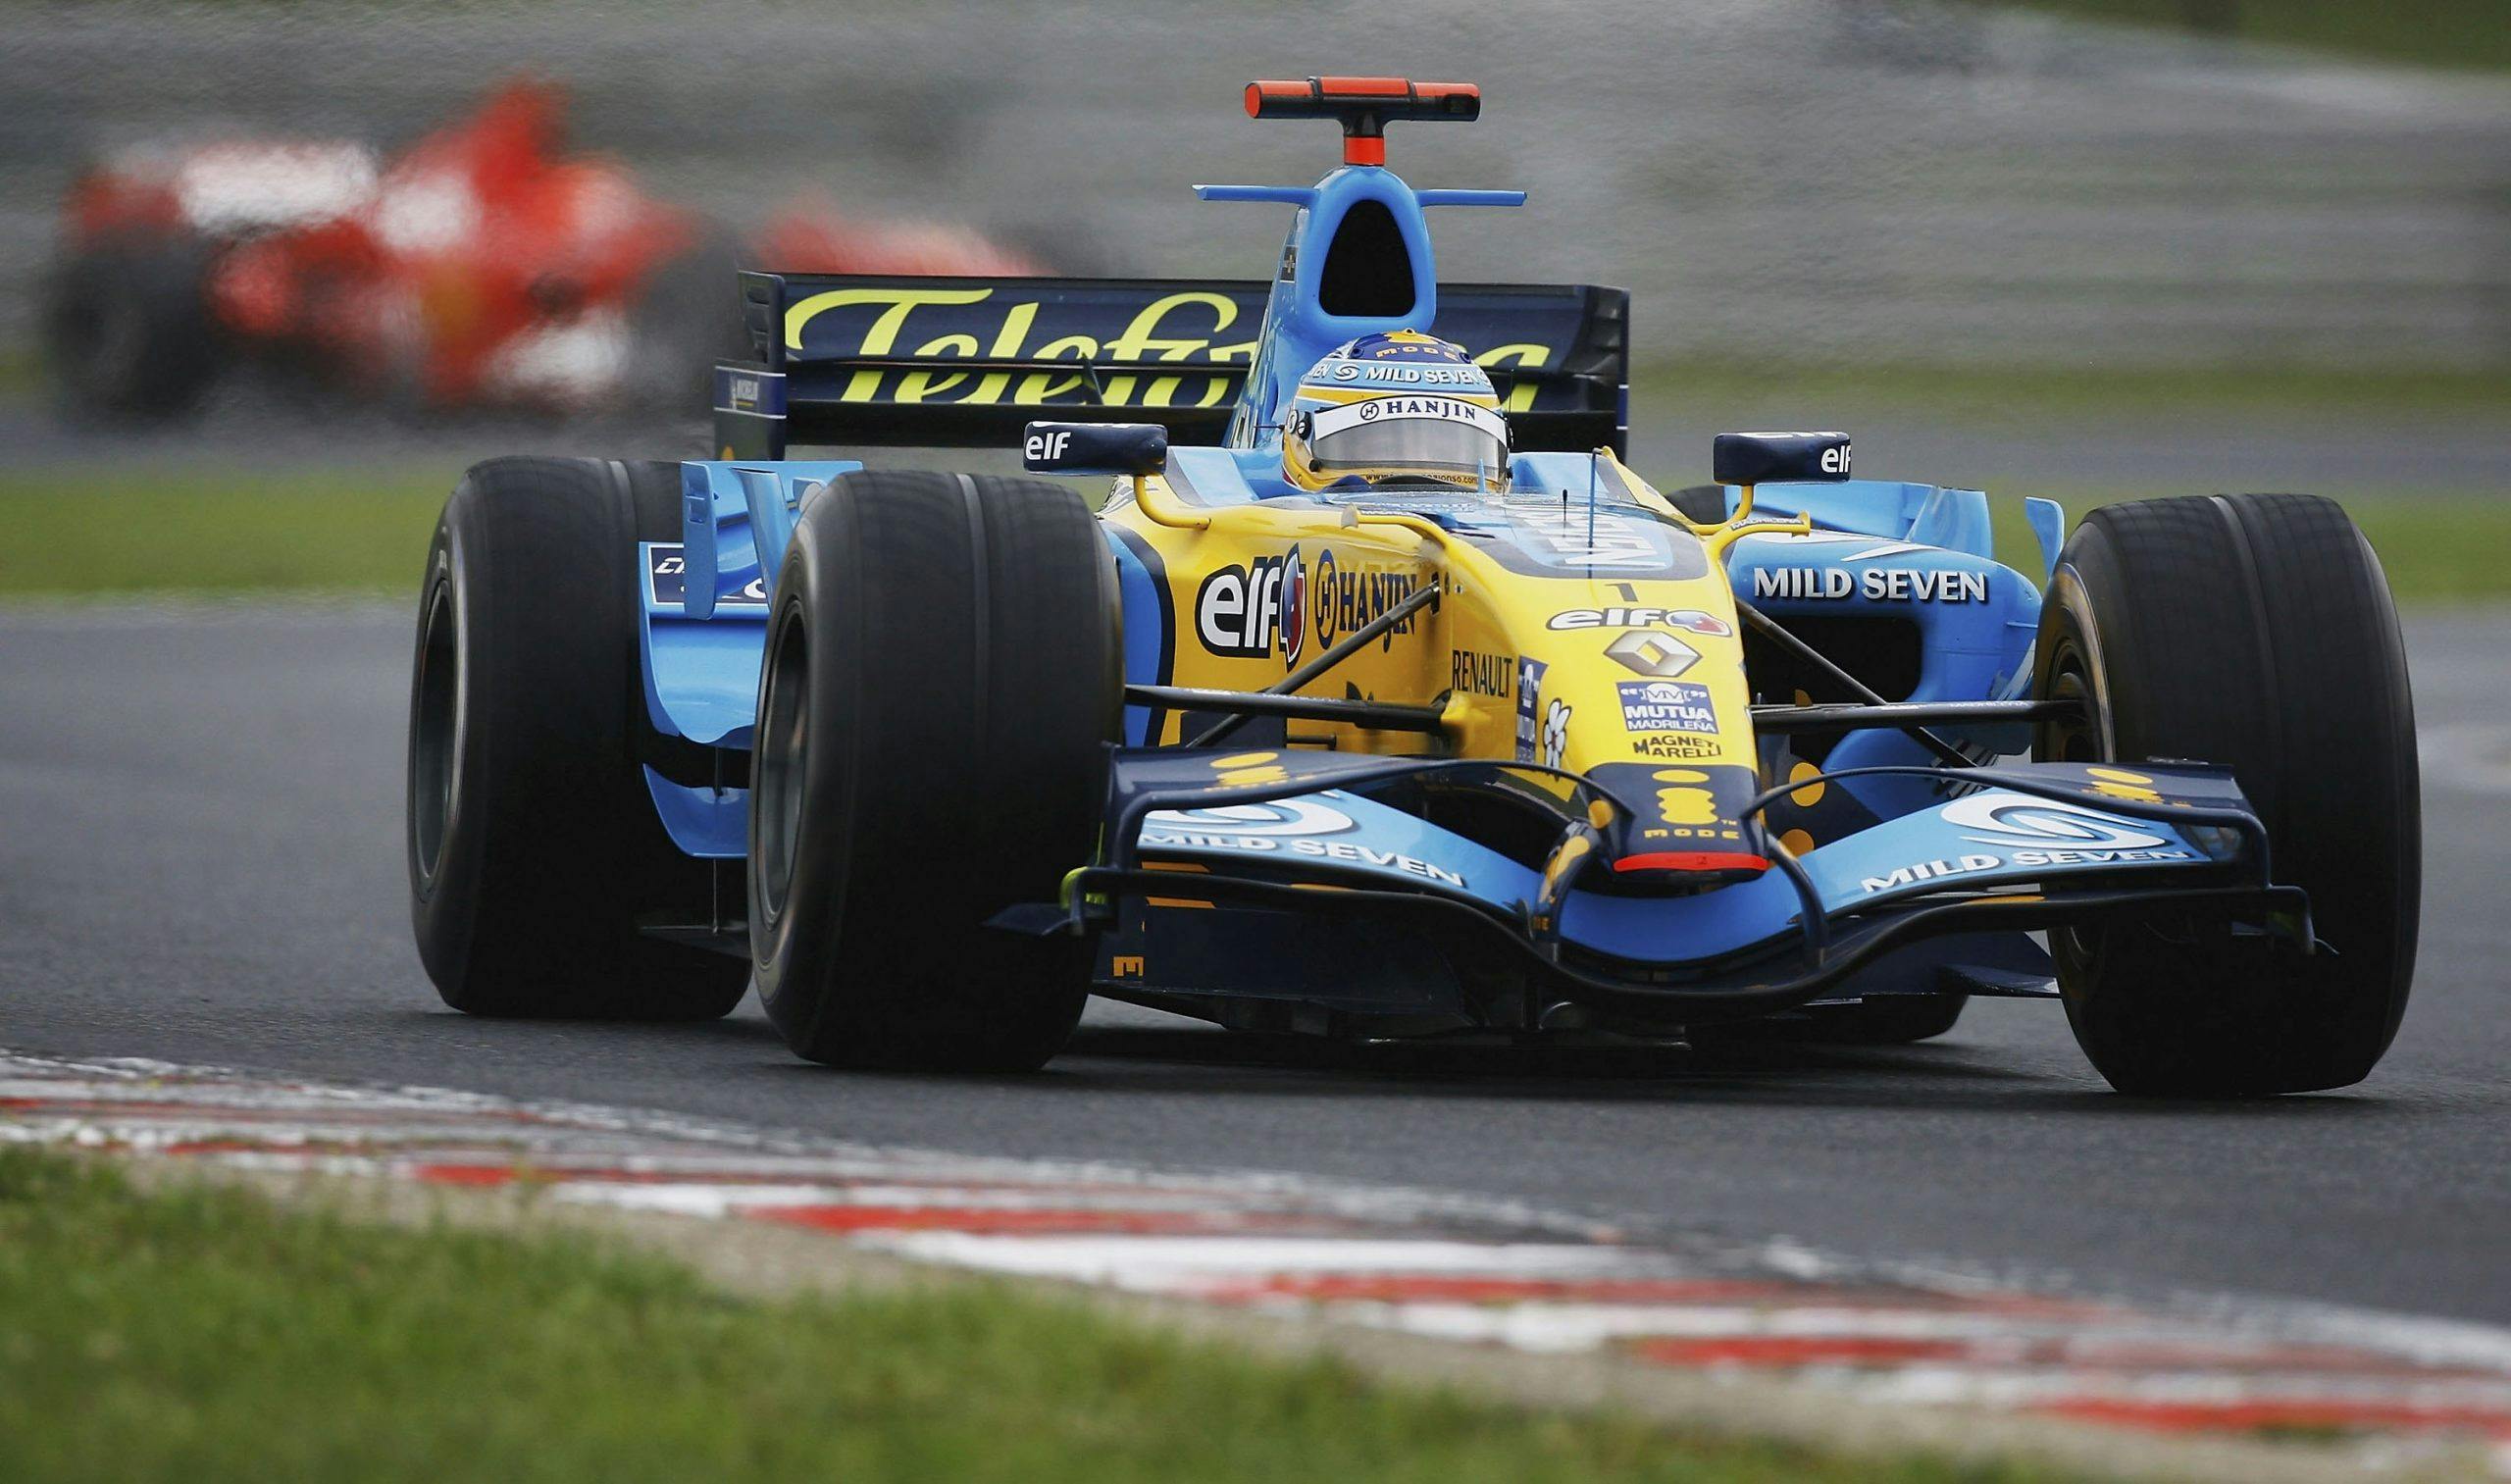 2006 F1 Grand Prix of Hungary Alonso racing action